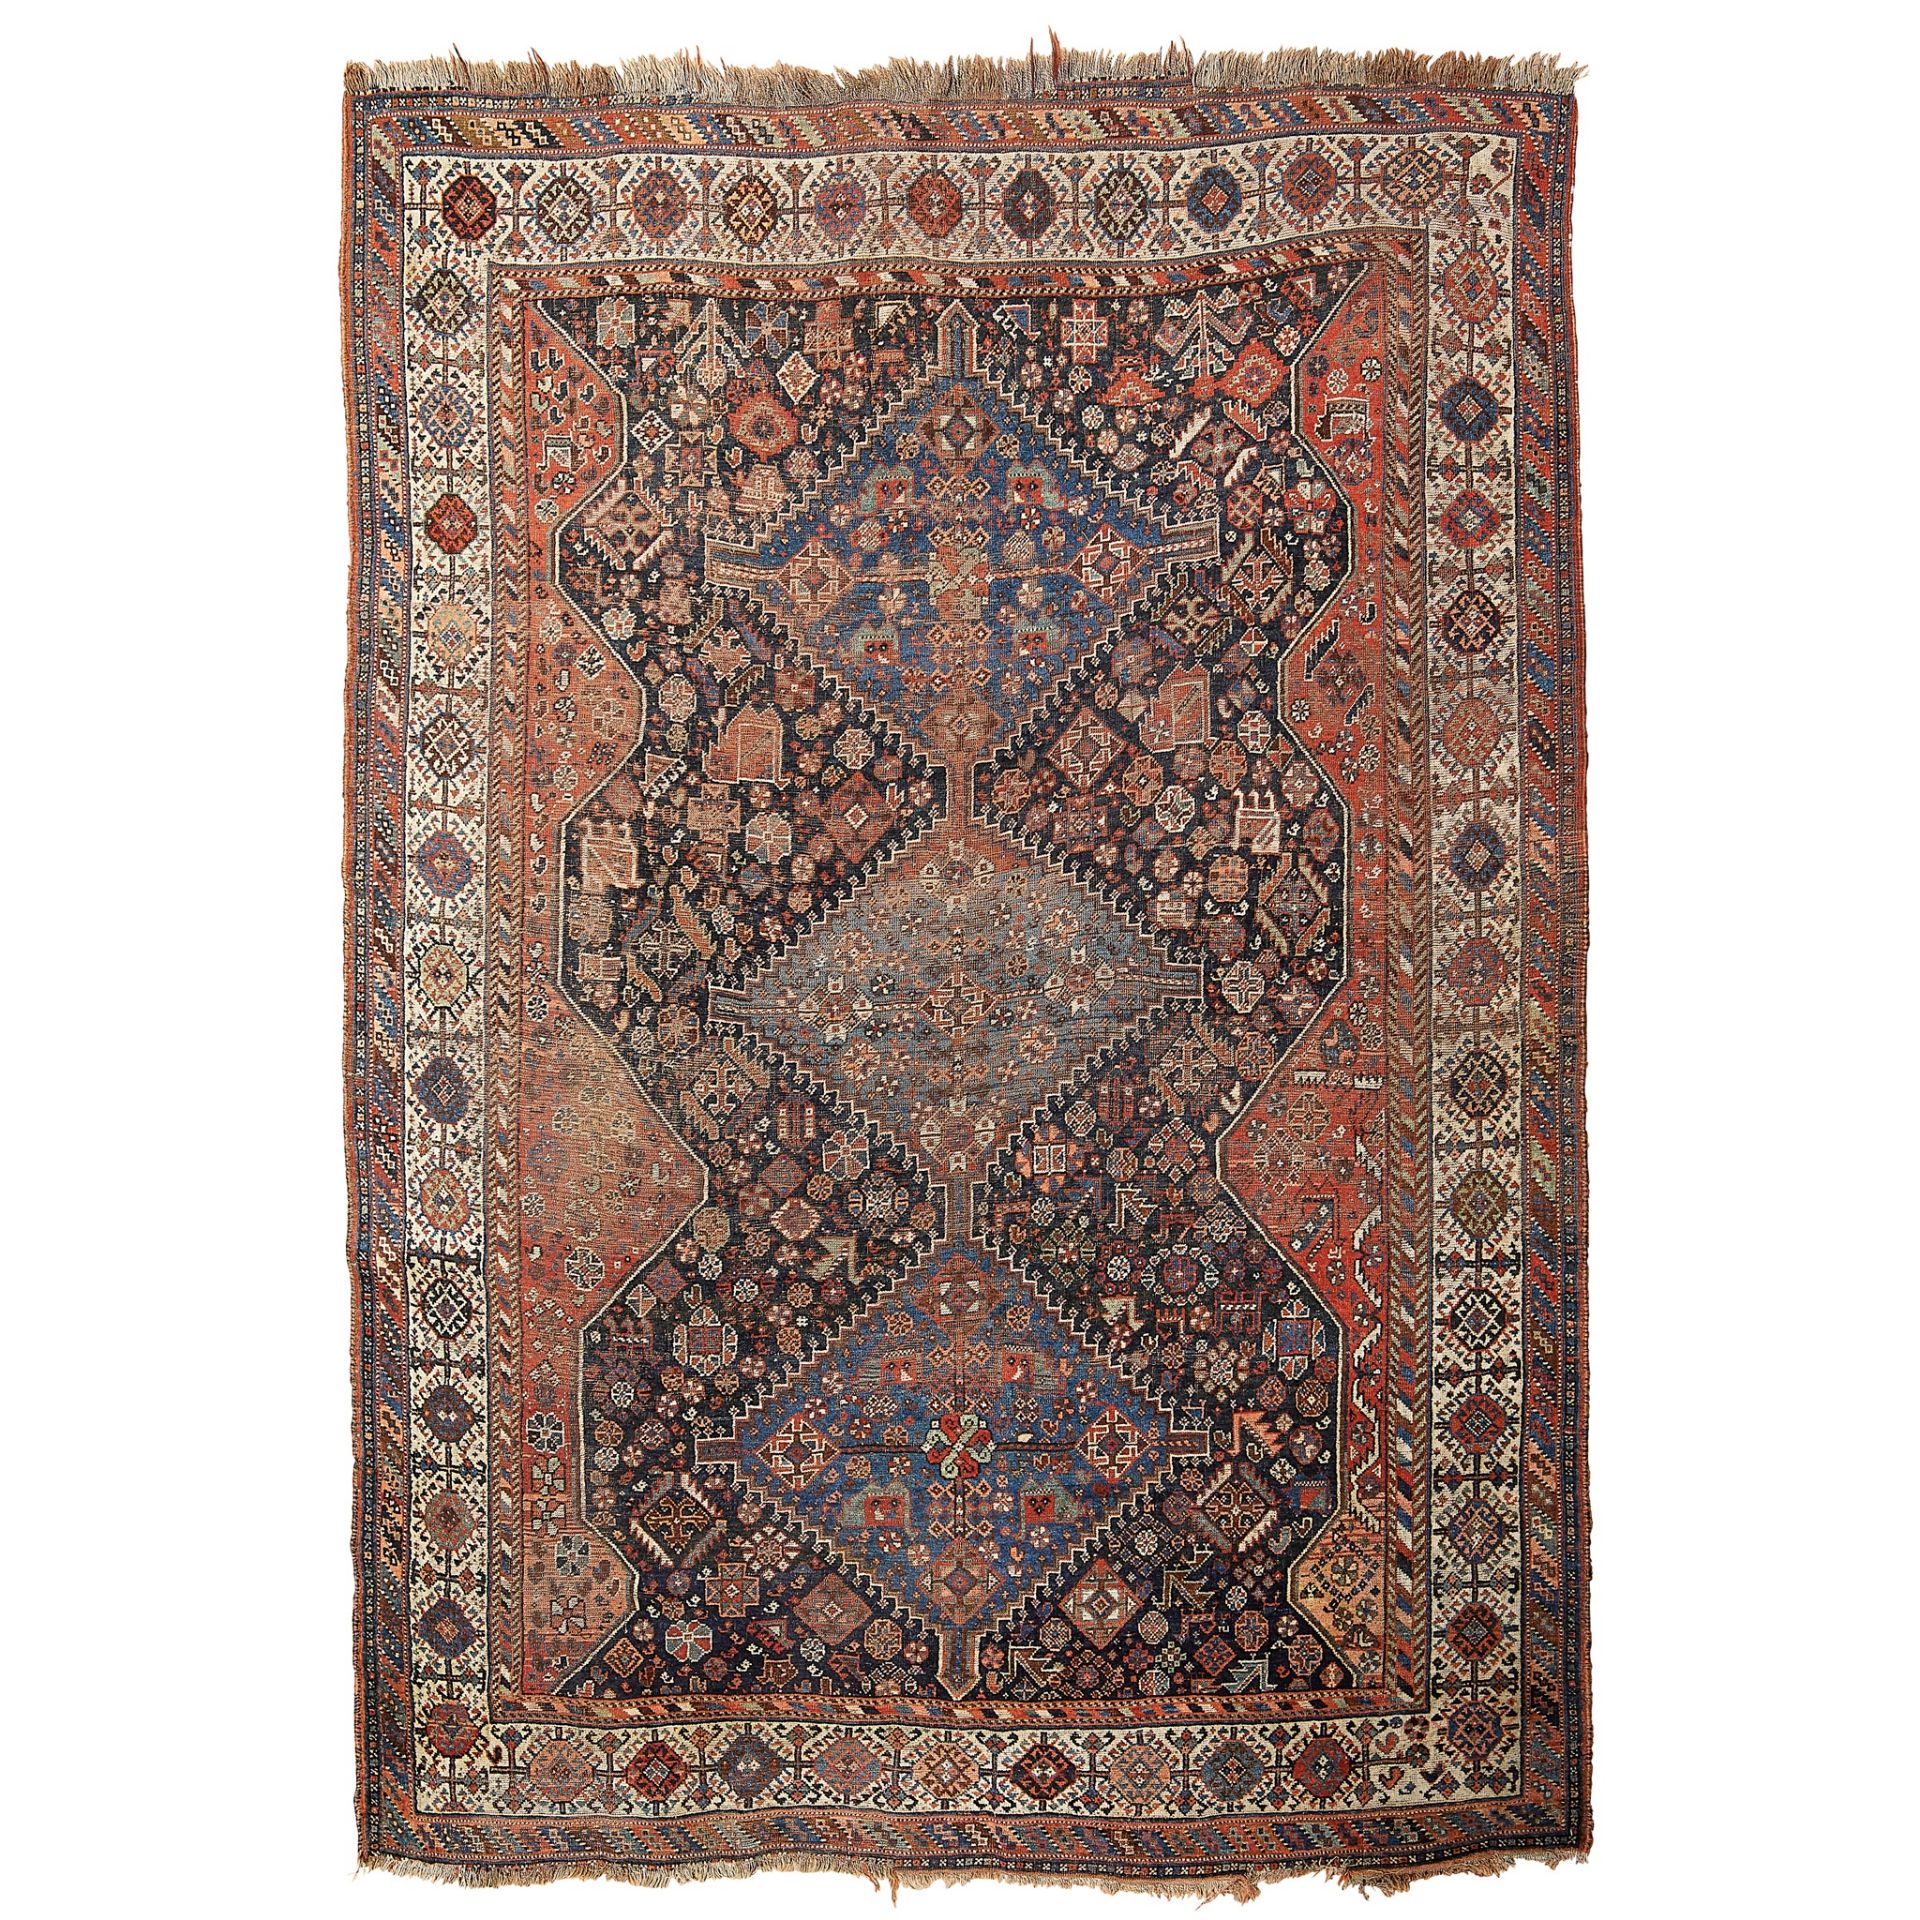 QASHQAI CARPET SOUTH PERSIA, LATE 19TH/EARLY 20TH CENTURY